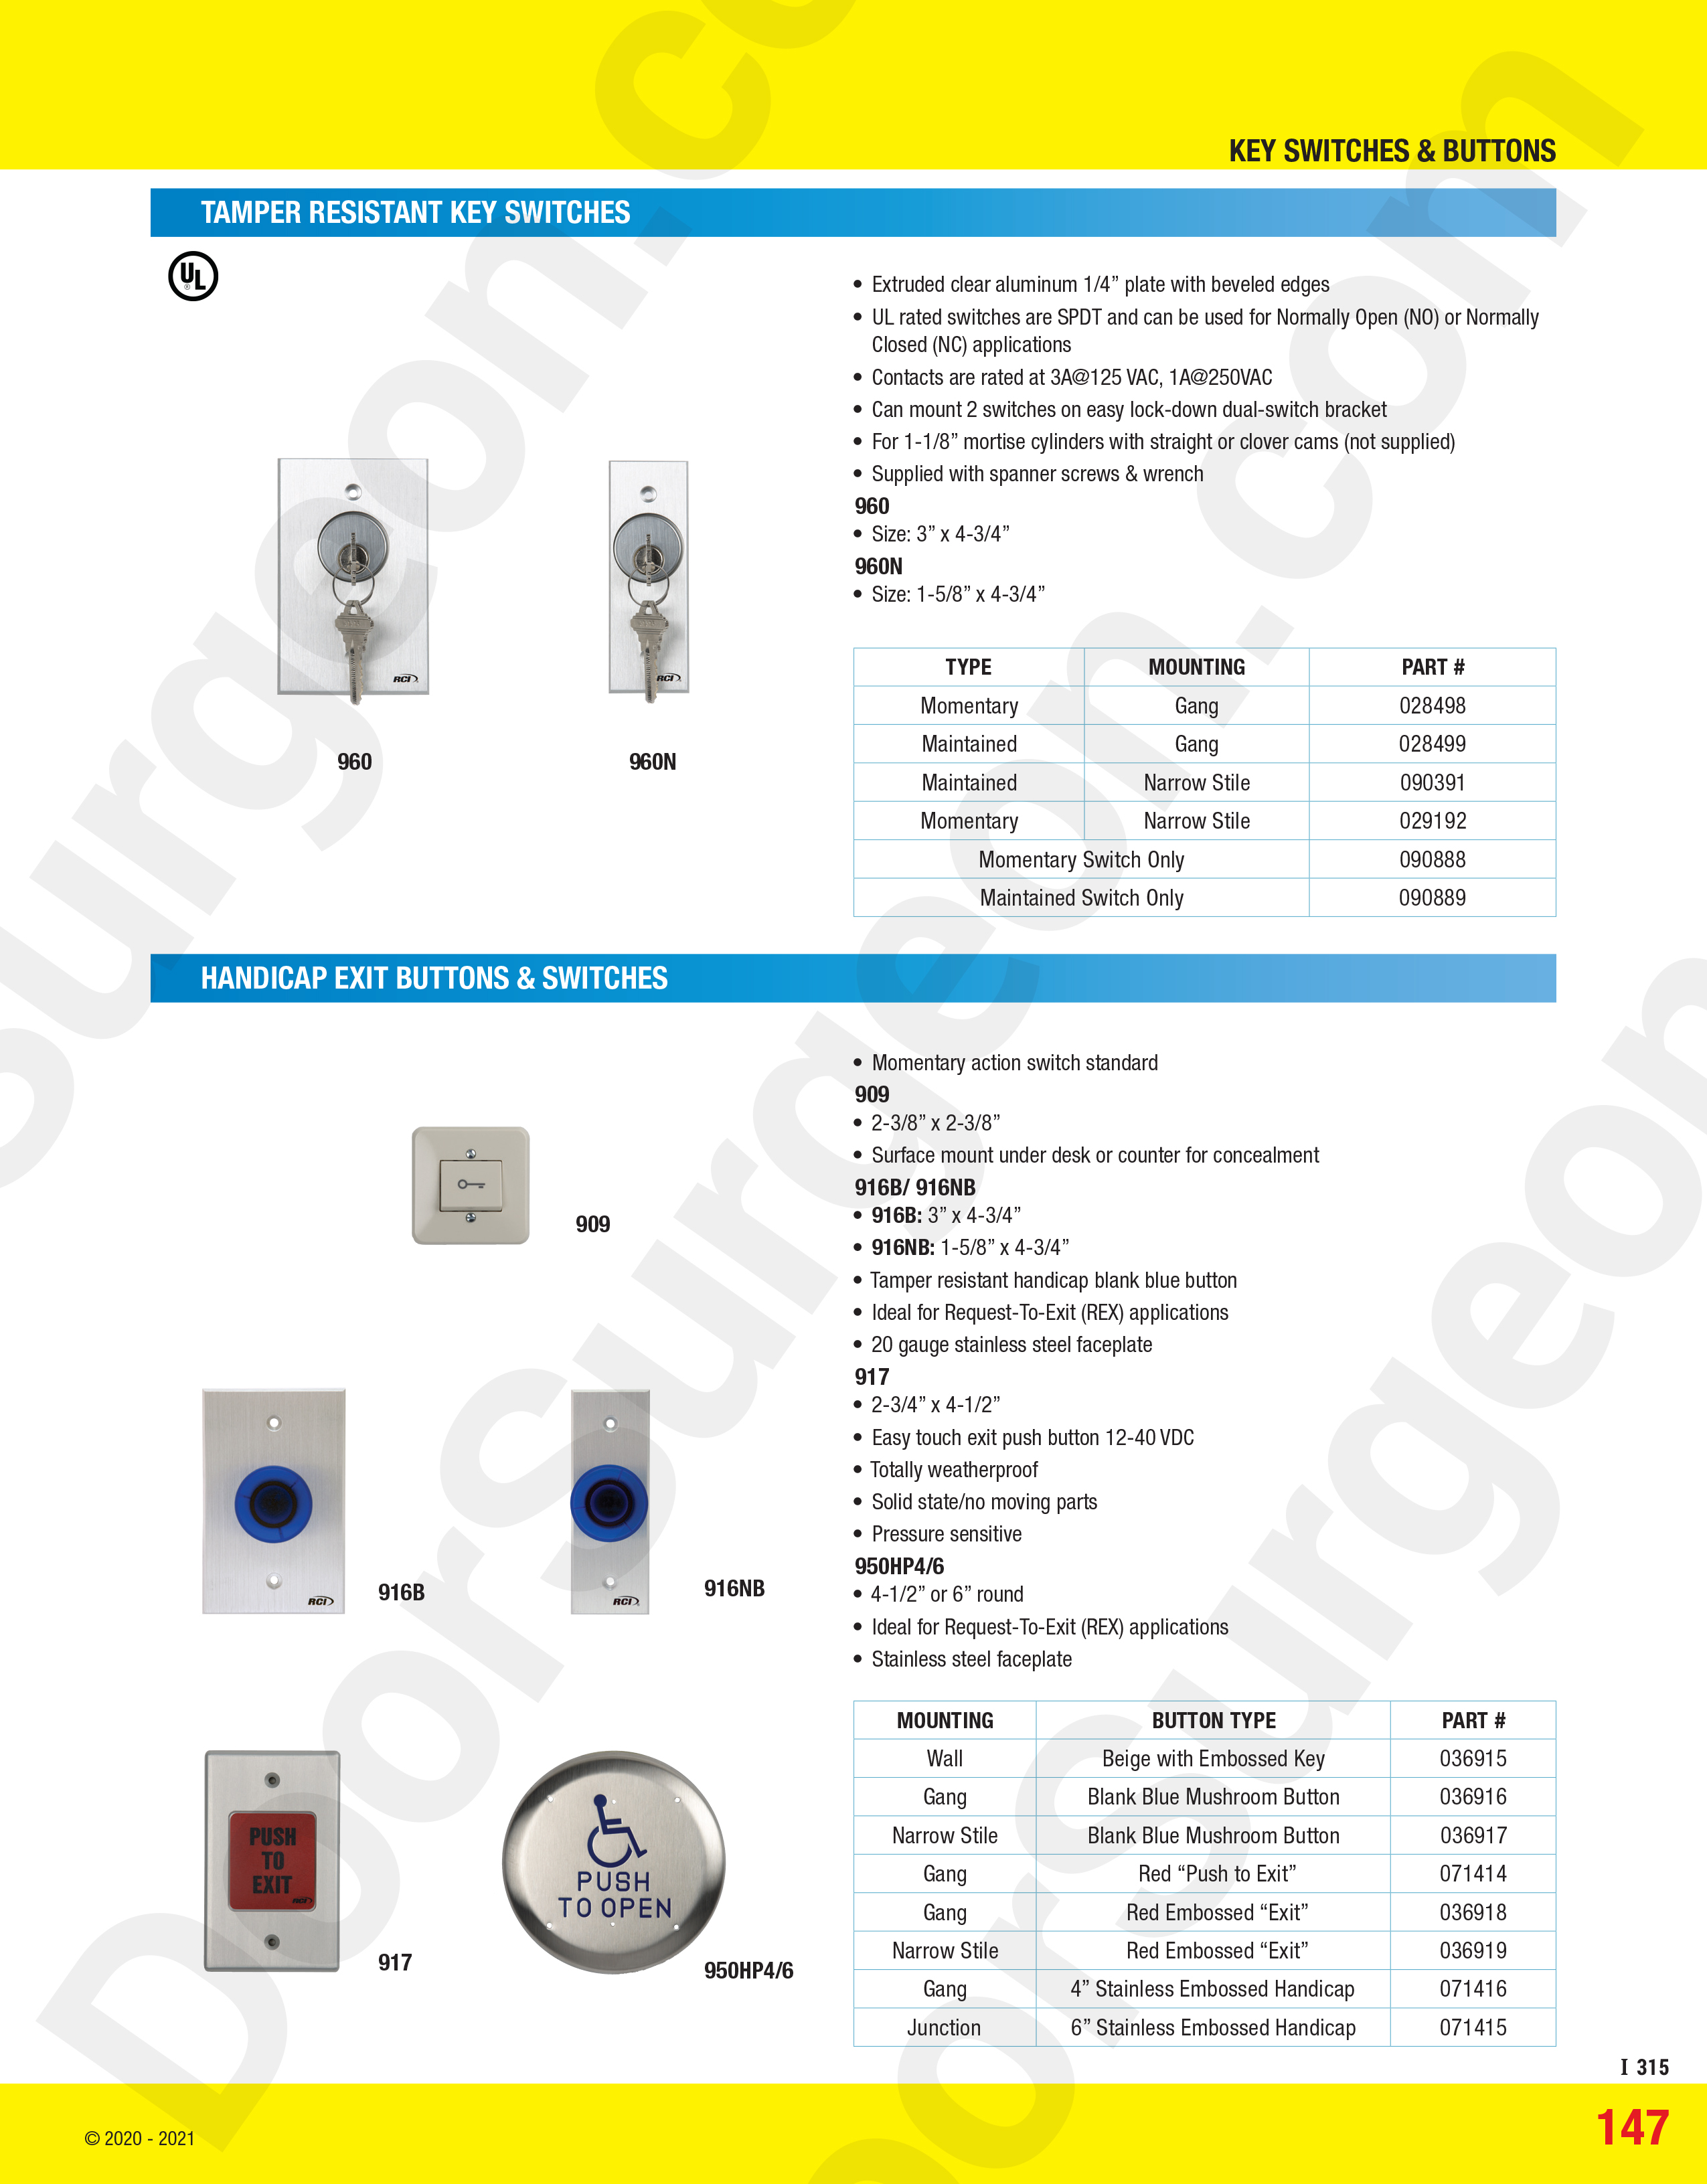 Tamper Resistant key switches, handicap exit buttons and switches.